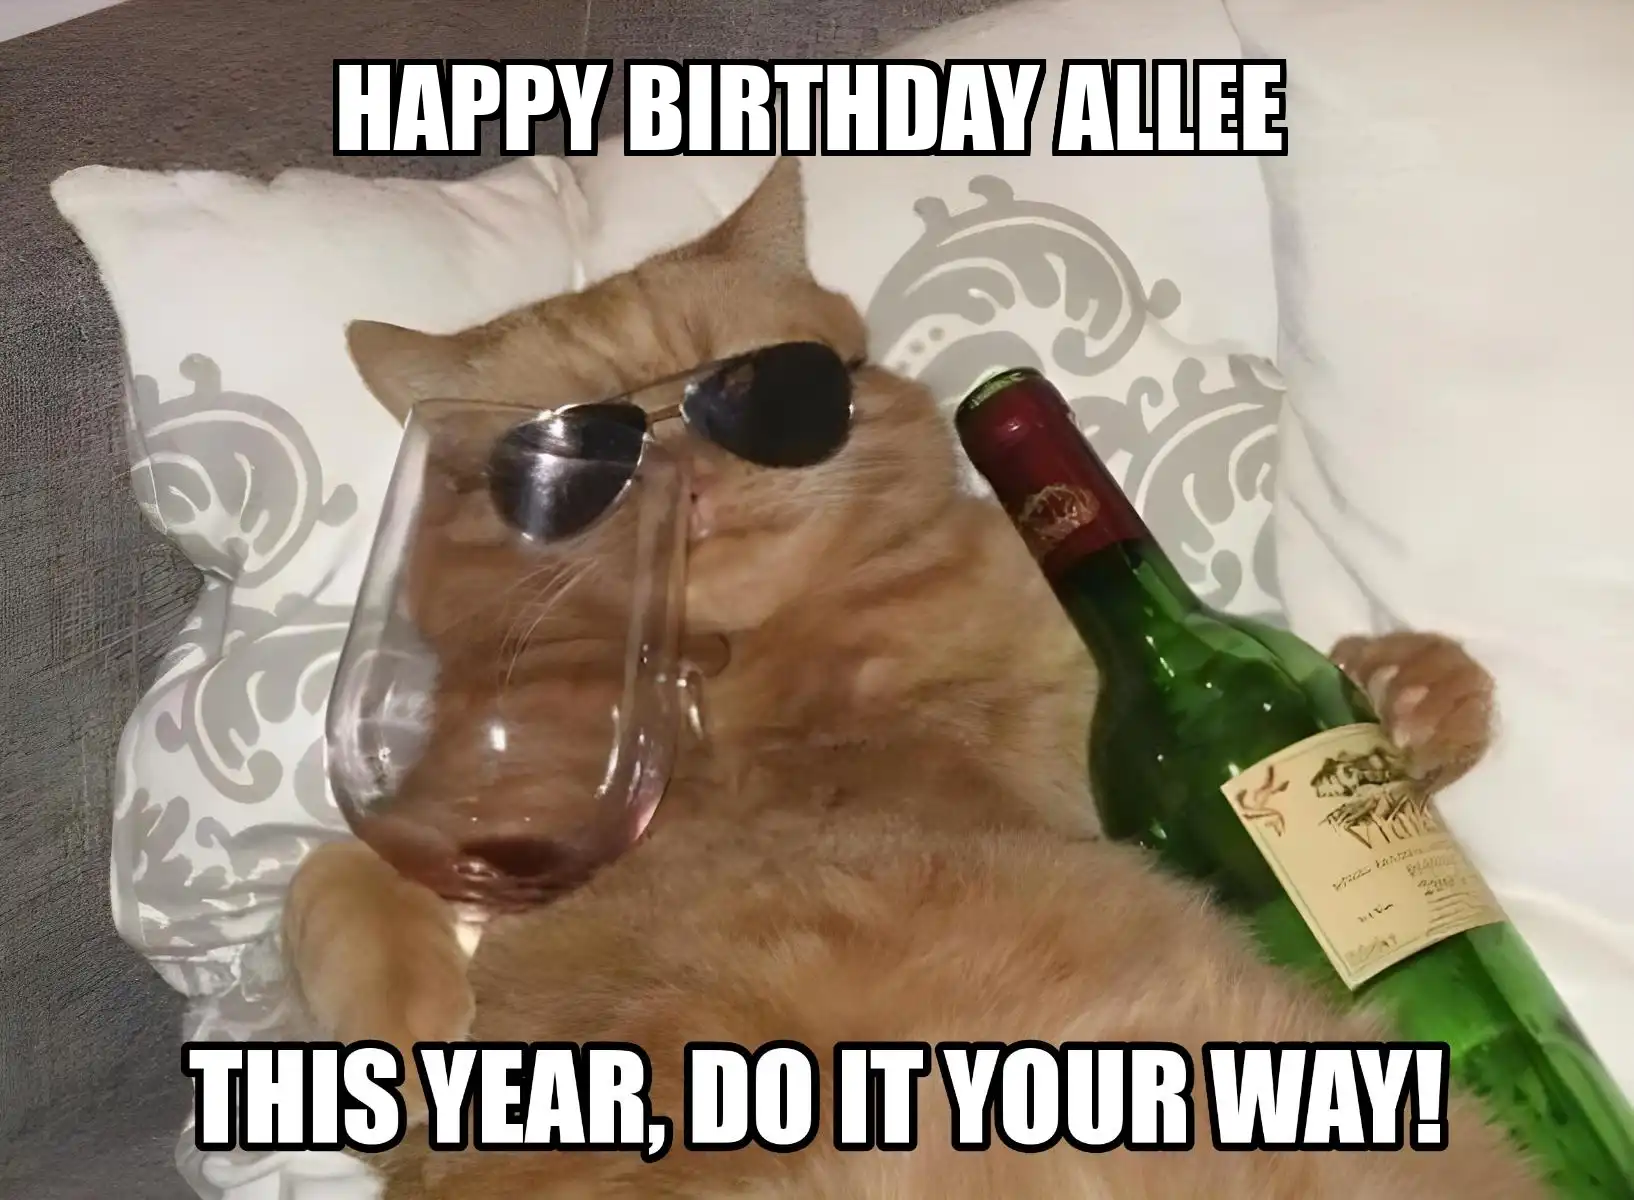 Happy Birthday Allee This Year Do It Your Way Meme